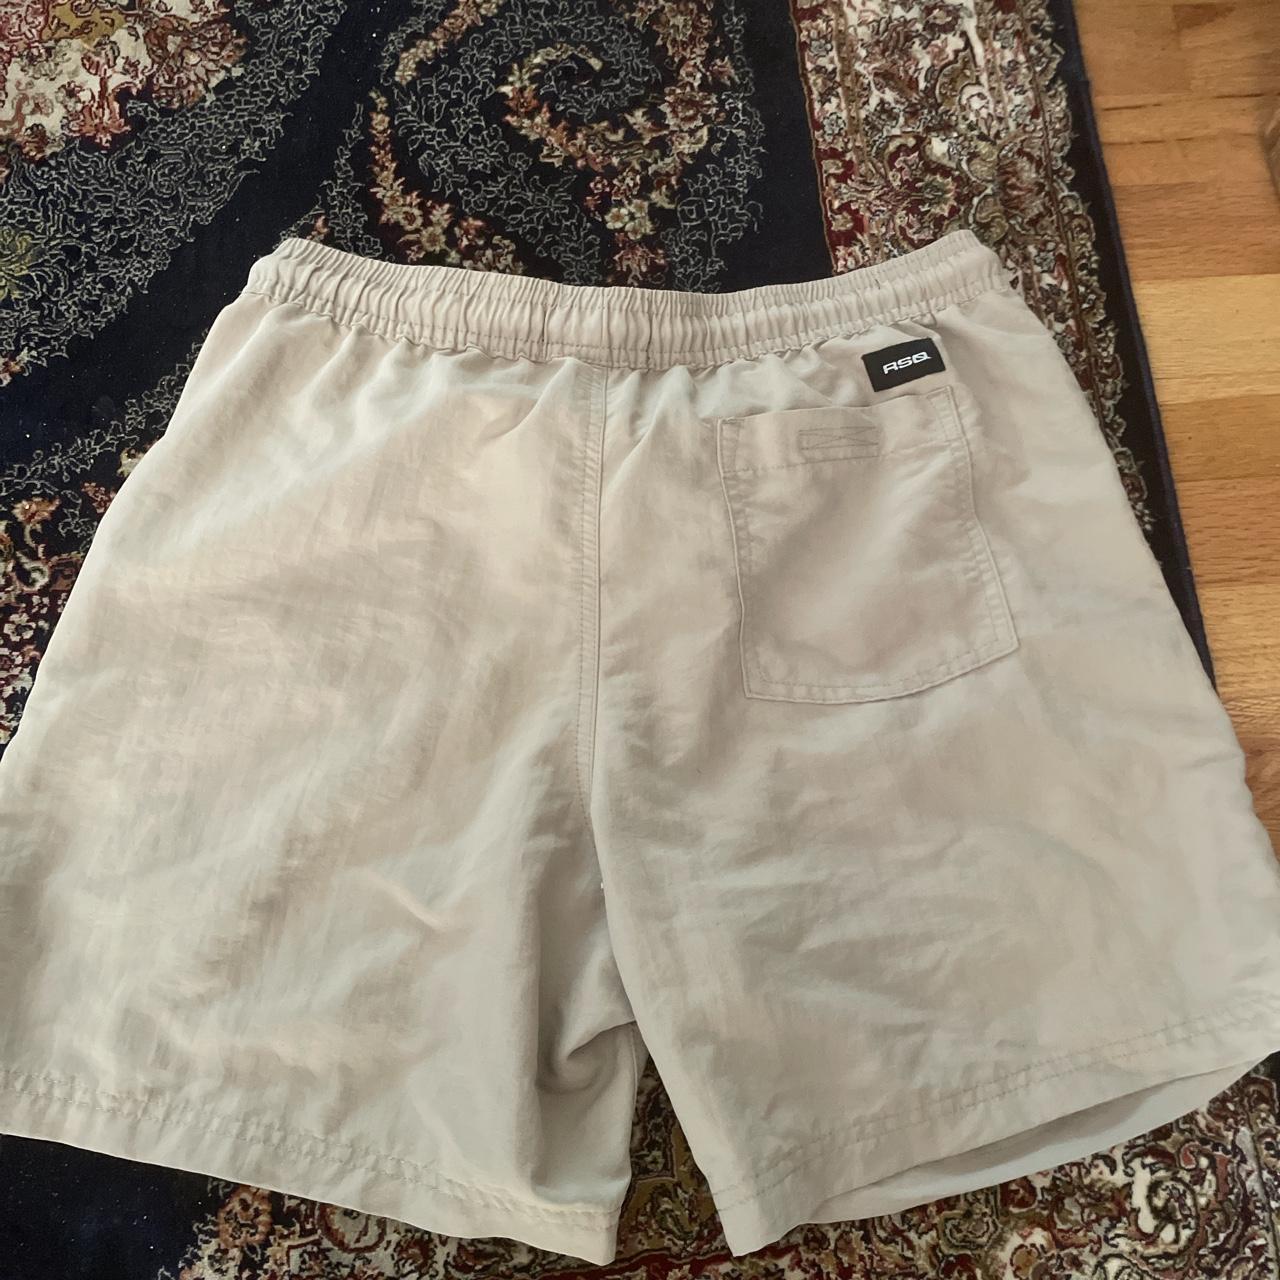 Summer RSQ Nylon shorts Vintage No holes or rips or... - Depop